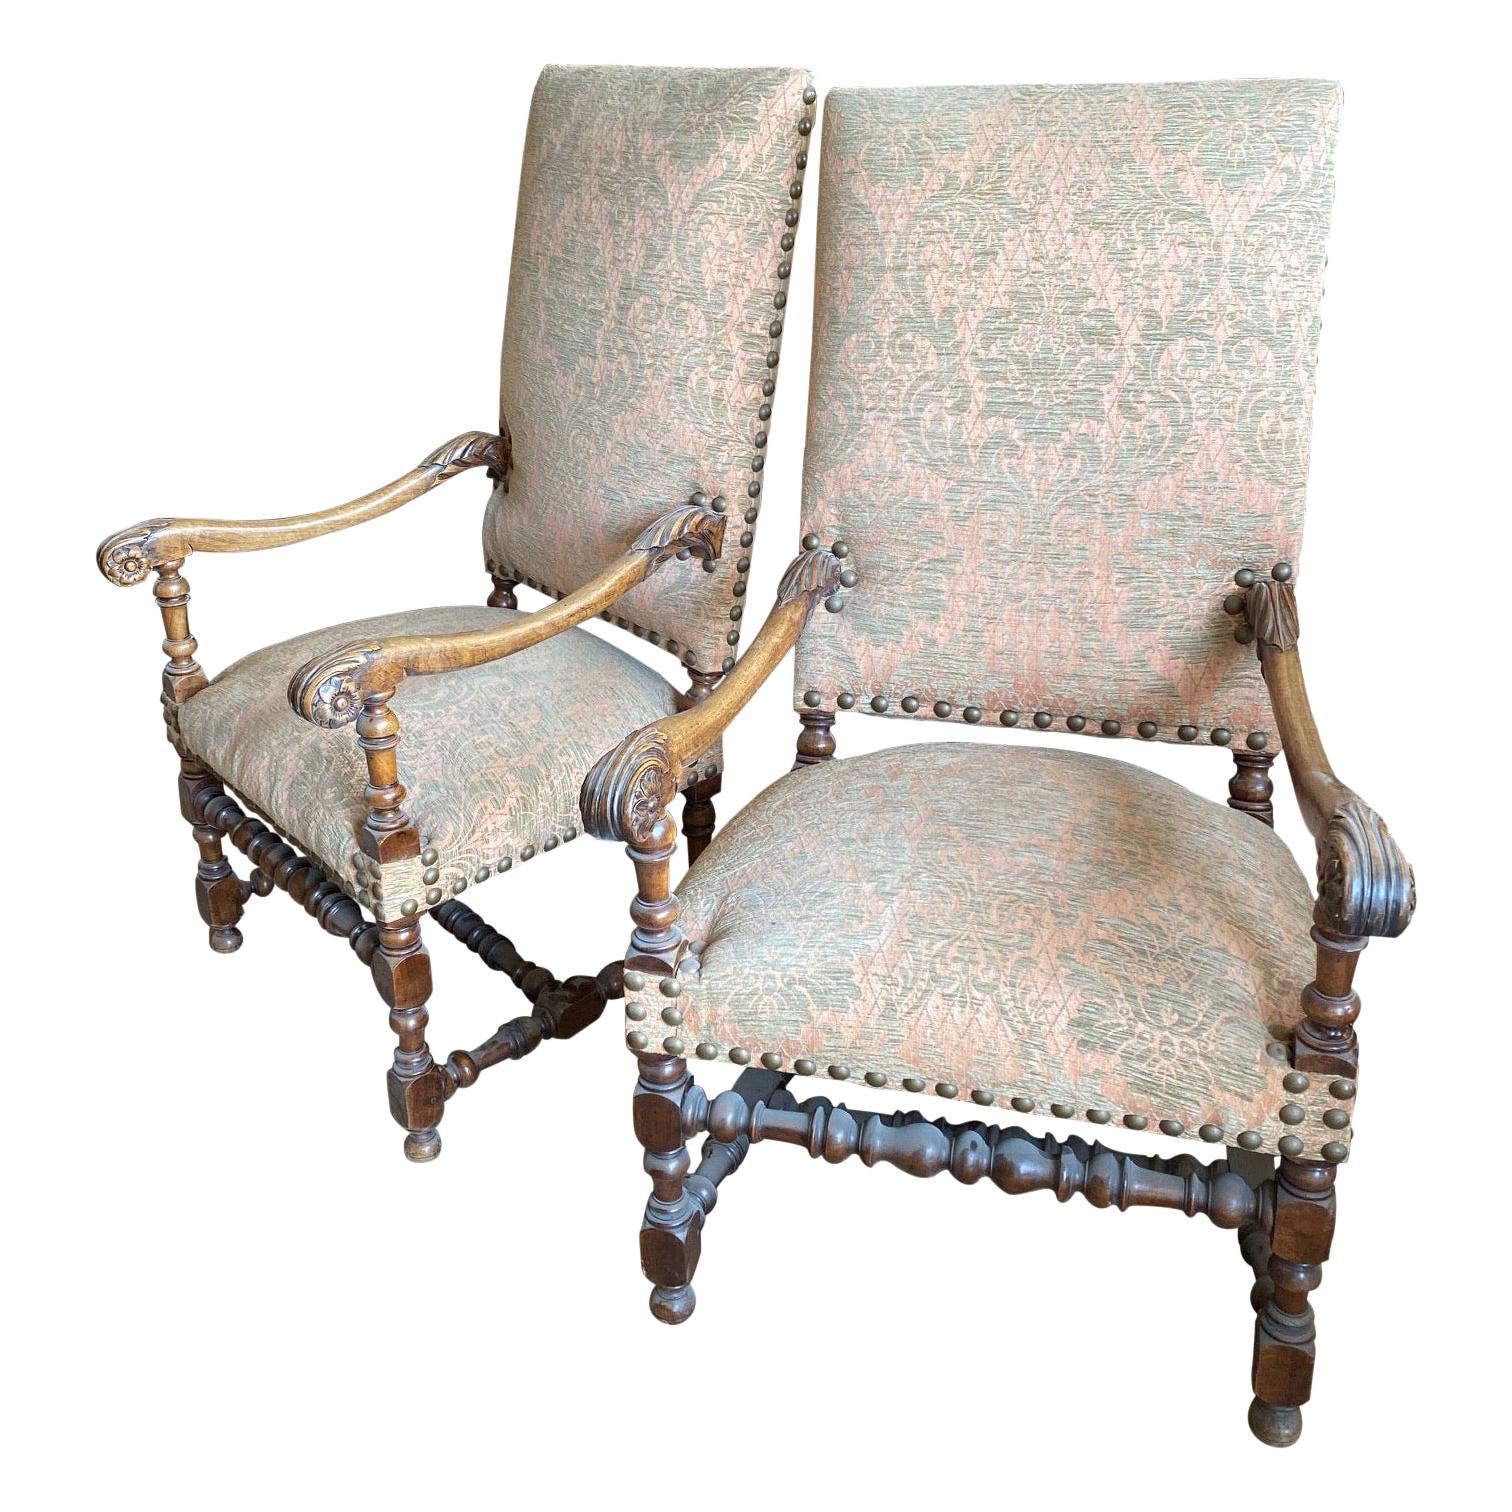 Pair of French Pastel Chairs, circa 1850